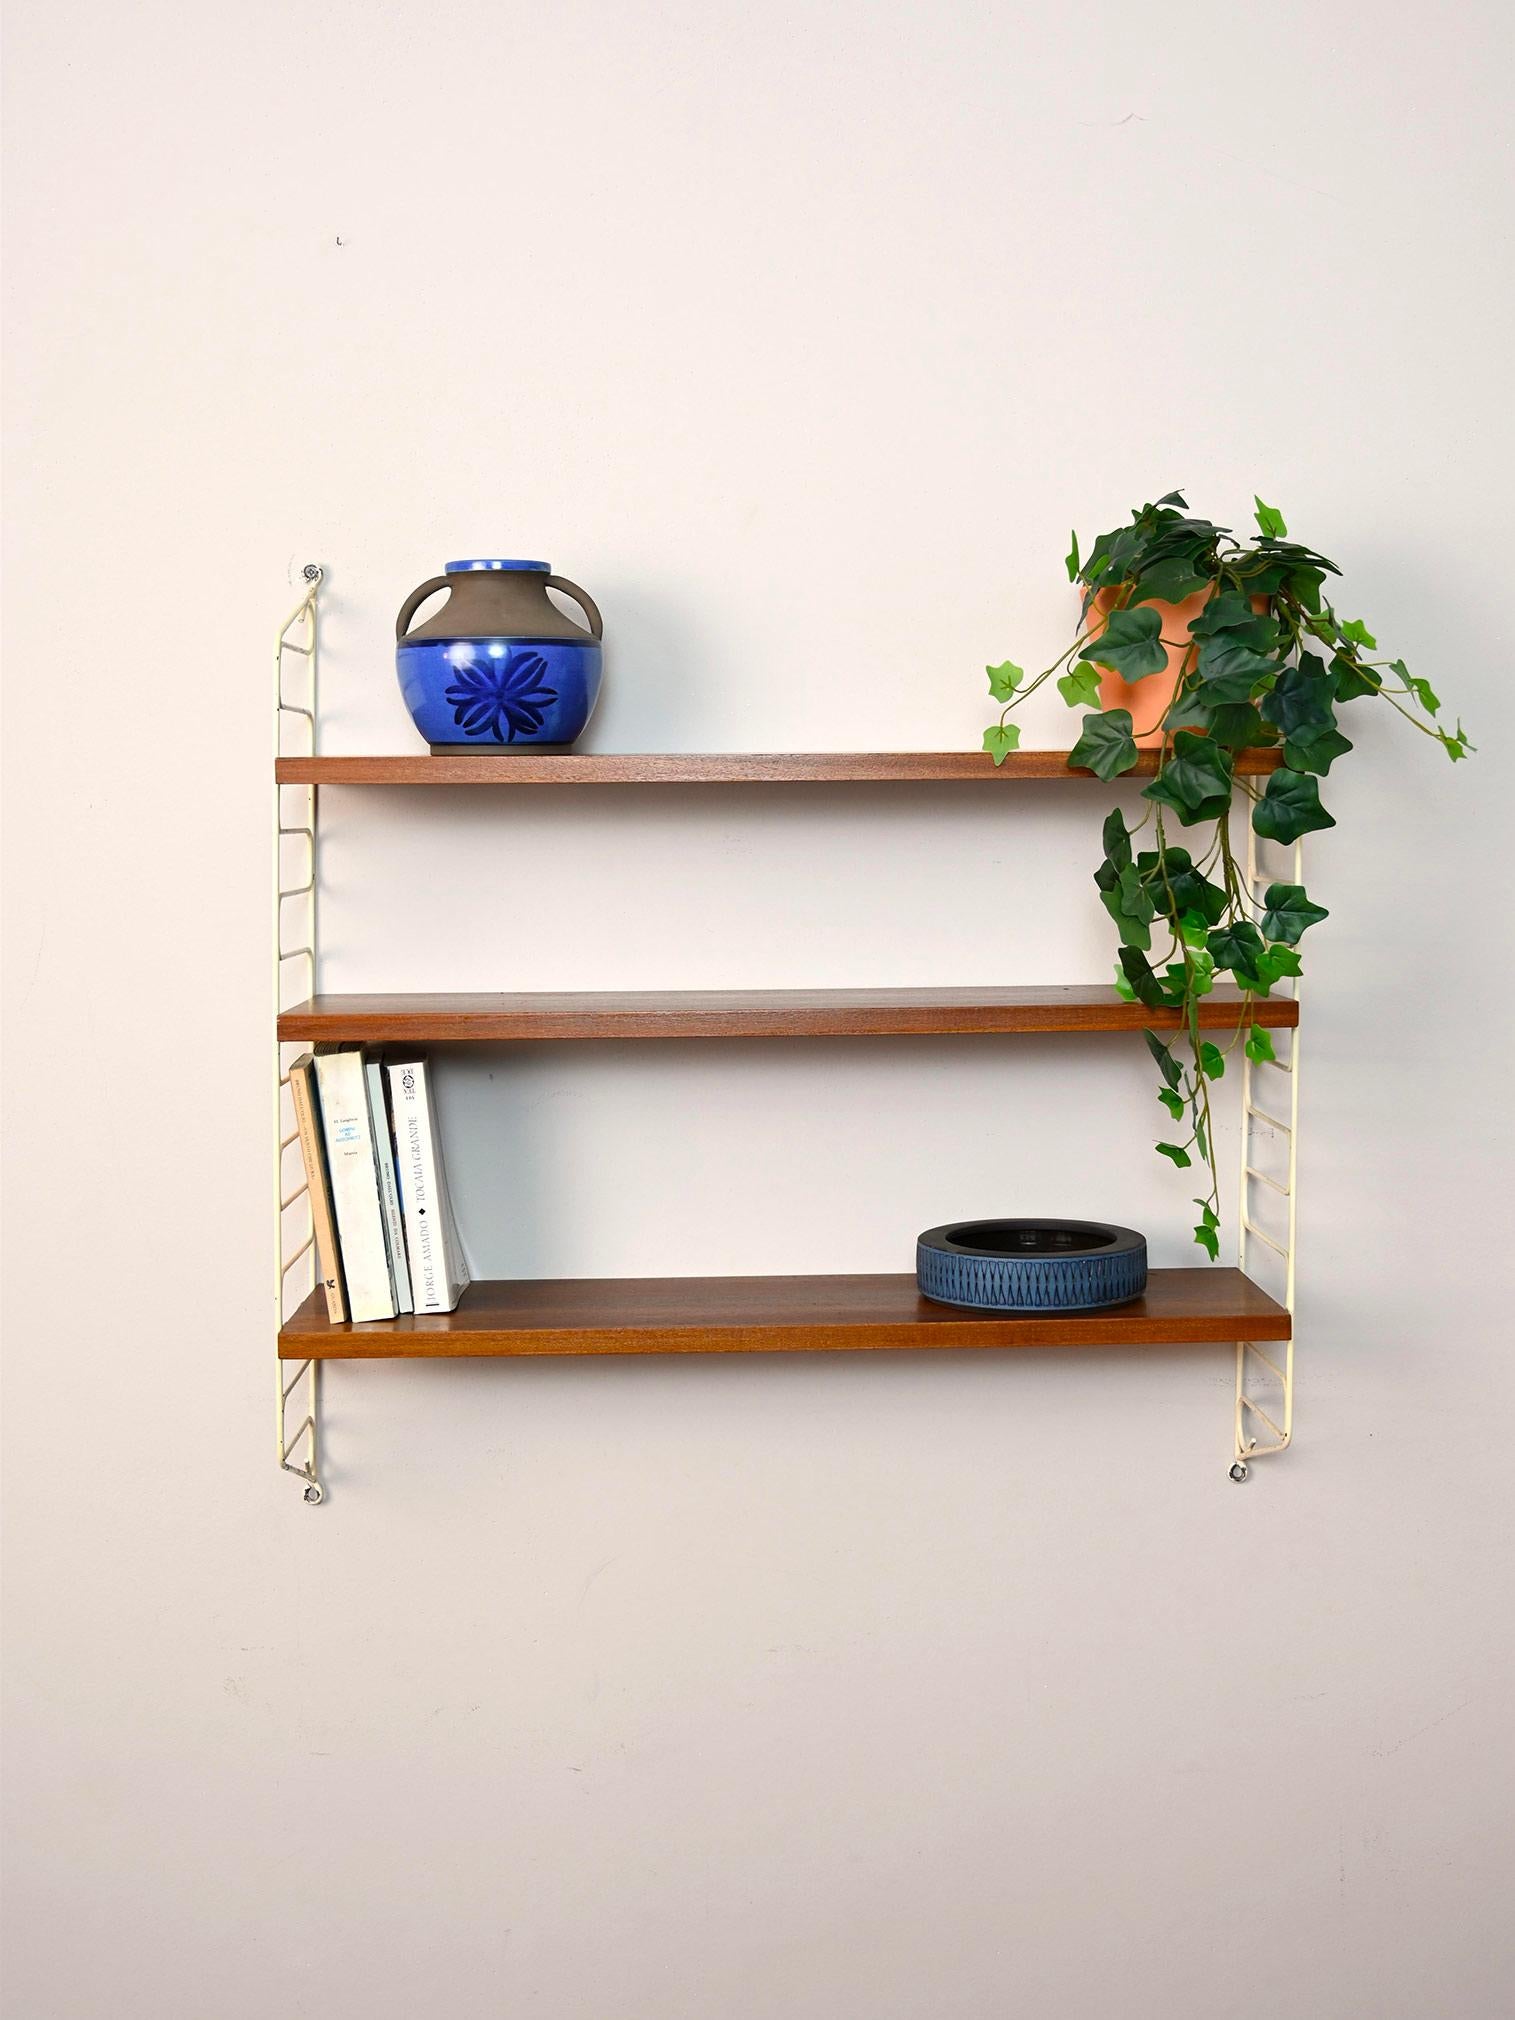 1960s Scandinavian bookcase.

This simple shelving system consists of a coated metal side frame on which three wooden shelves fit.
Simple and functional it can be hung in different rooms of the house.

Good condition. It has been restored with